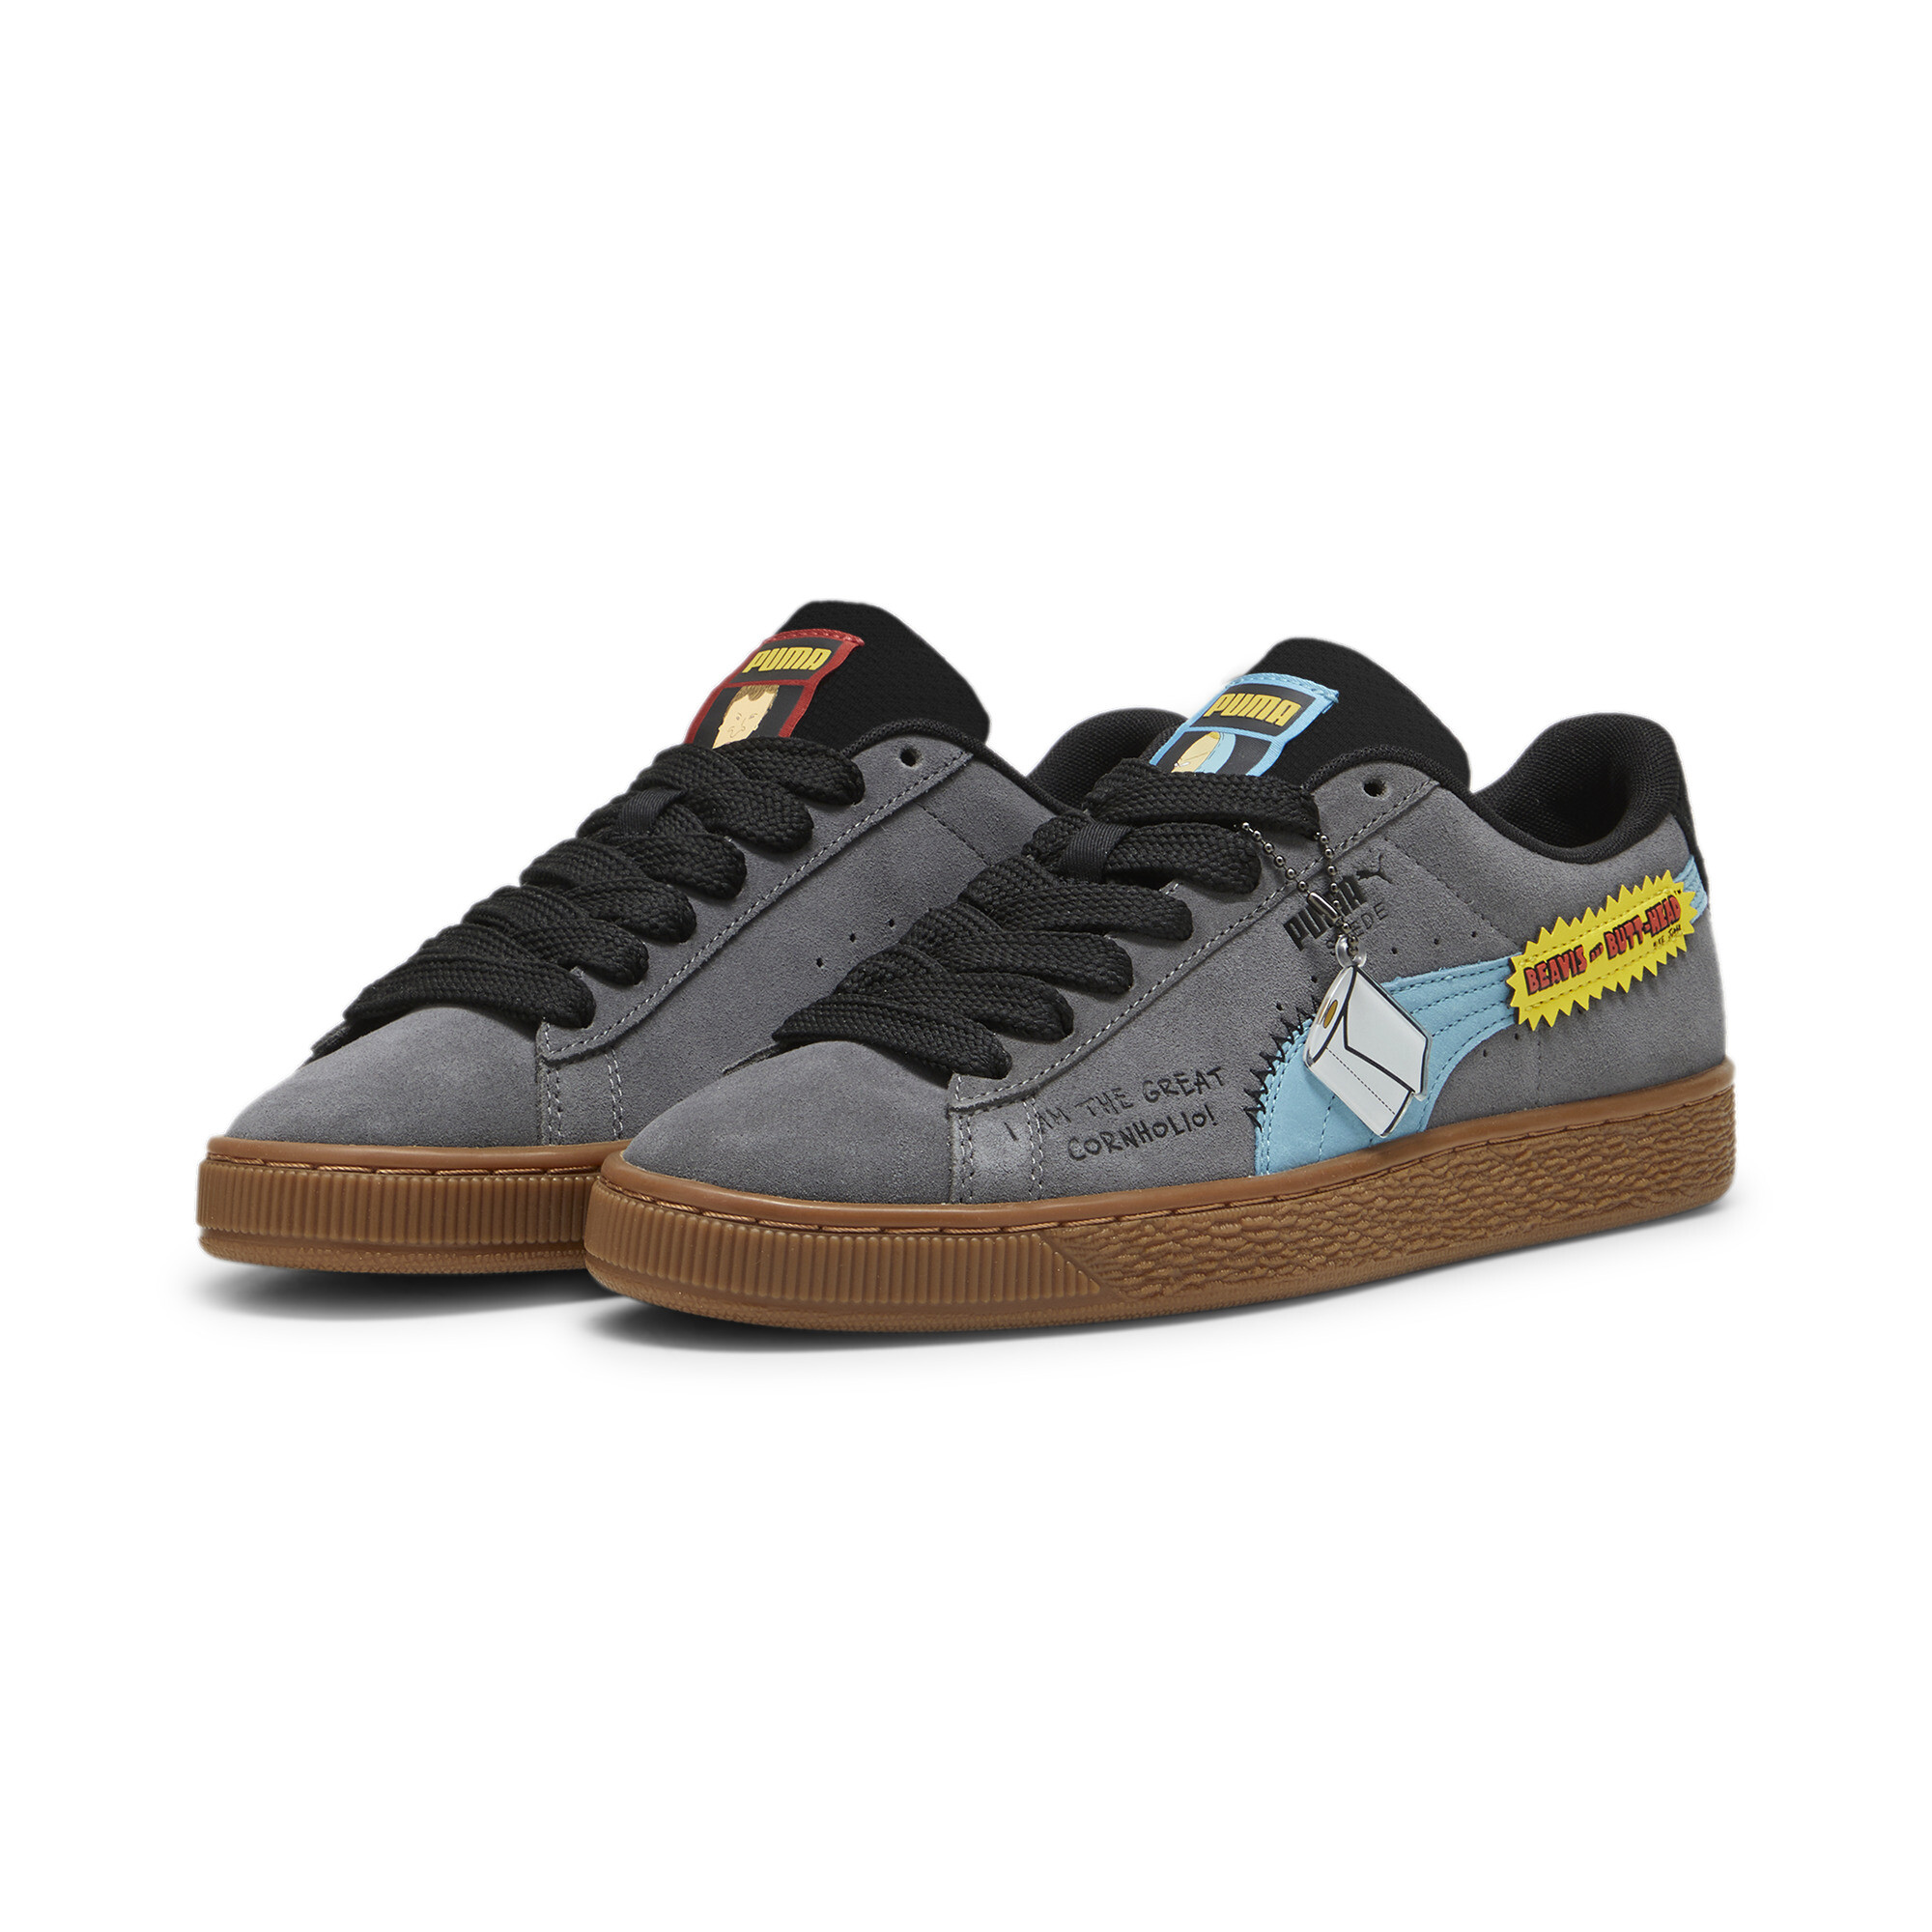 Kids' PUMA X BEAVIS AND BUTTHEAD Suede Sneakers In Gray, Size EU 47